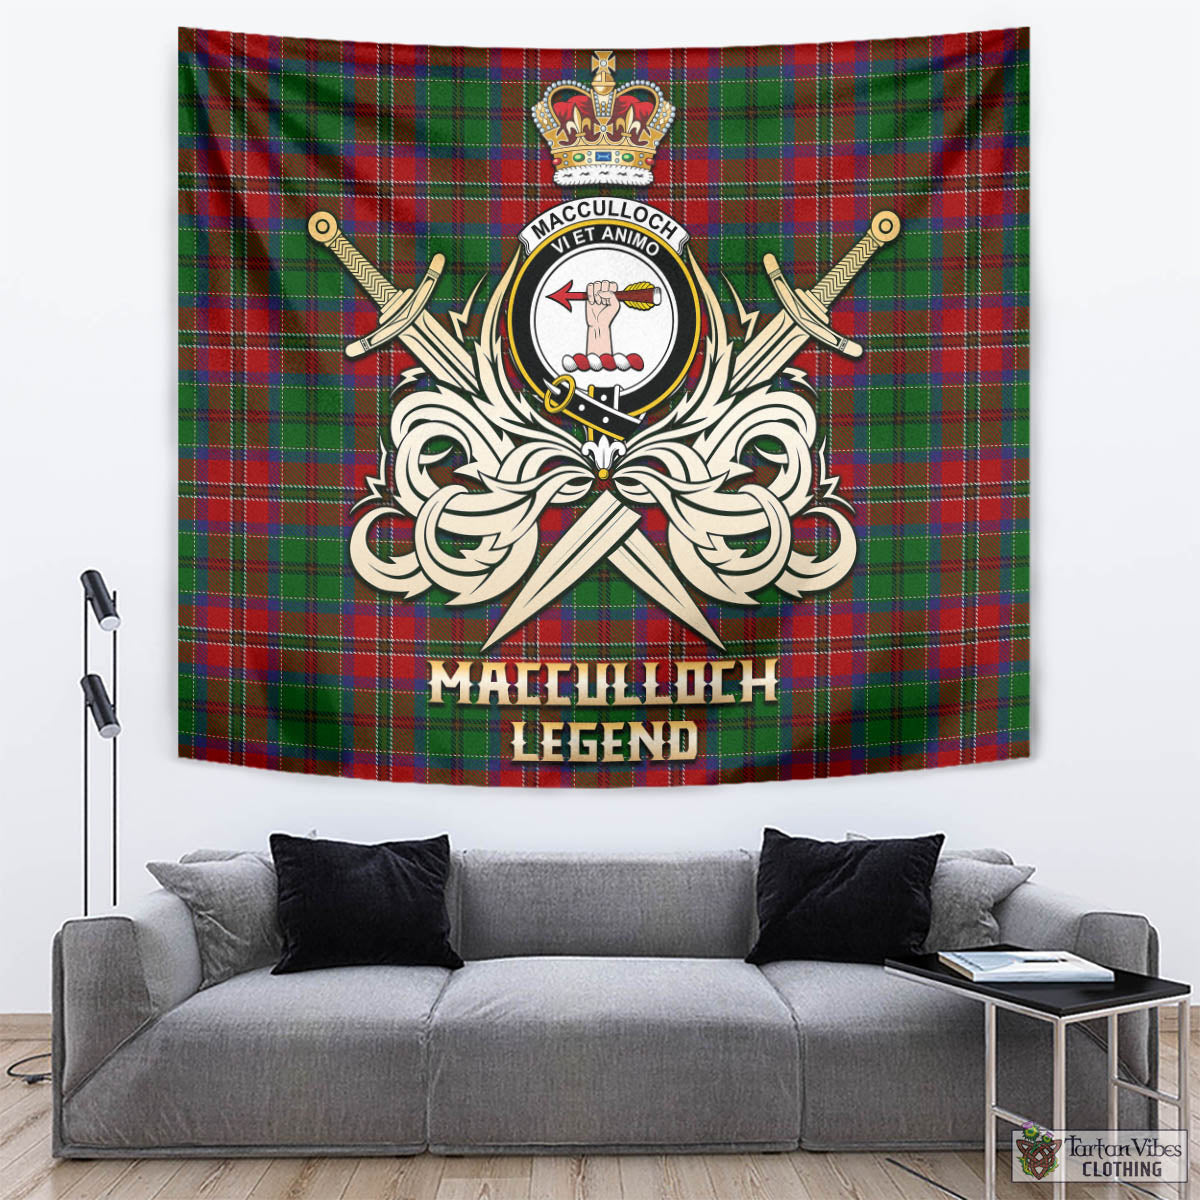 Tartan Vibes Clothing MacCulloch Tartan Tapestry with Clan Crest and the Golden Sword of Courageous Legacy